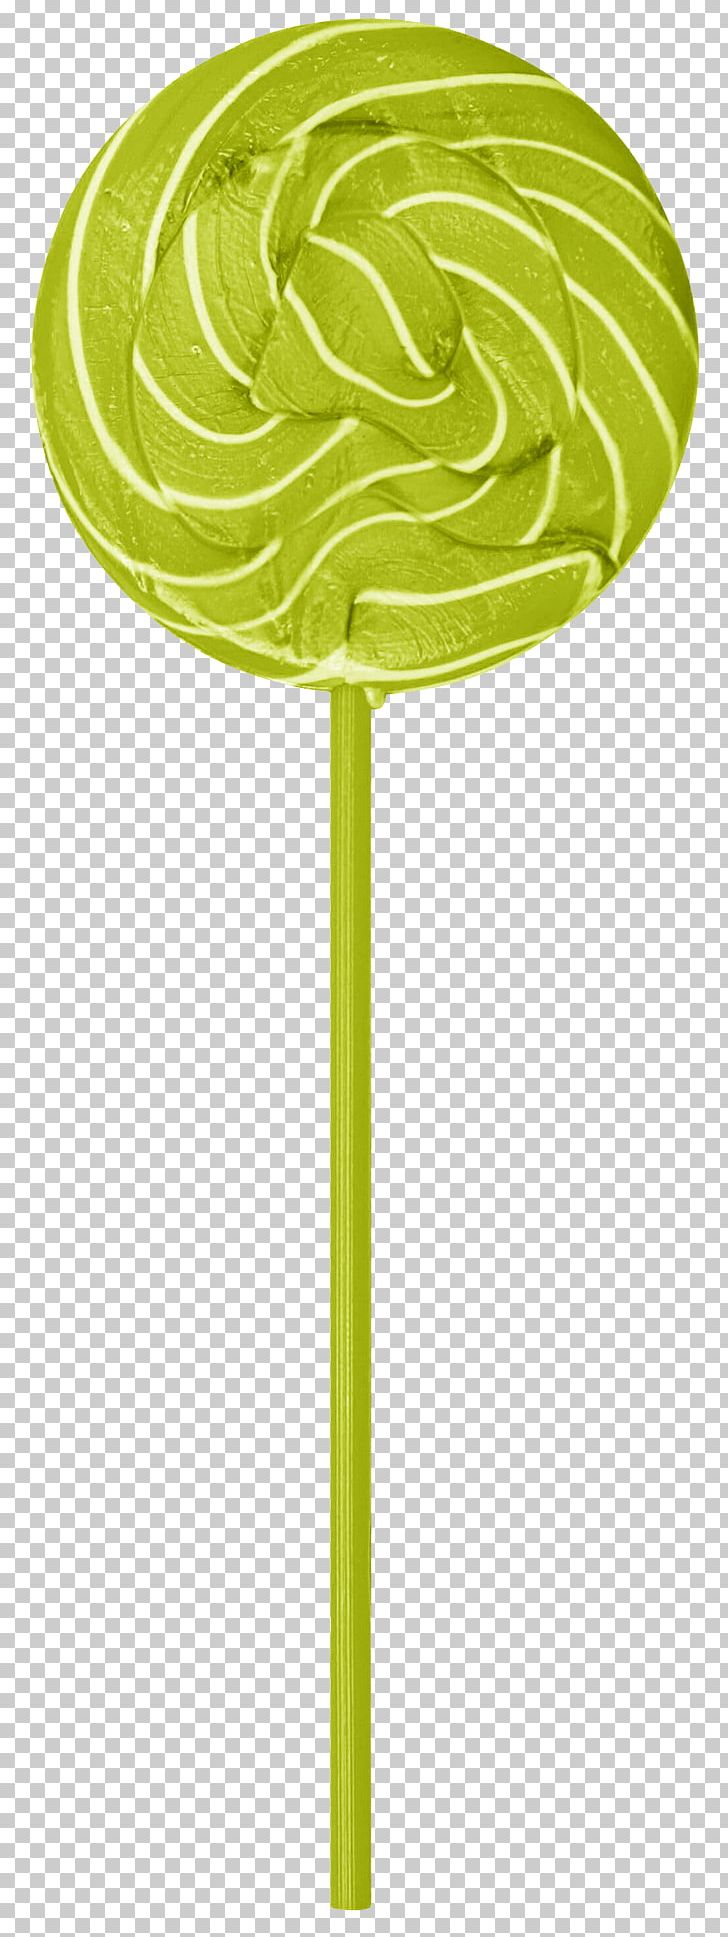 Lollipop Sugar Candy PNG, Clipart, Adobe Illustrator, Candies, Candy, Candy Border, Candy Cane Free PNG Download